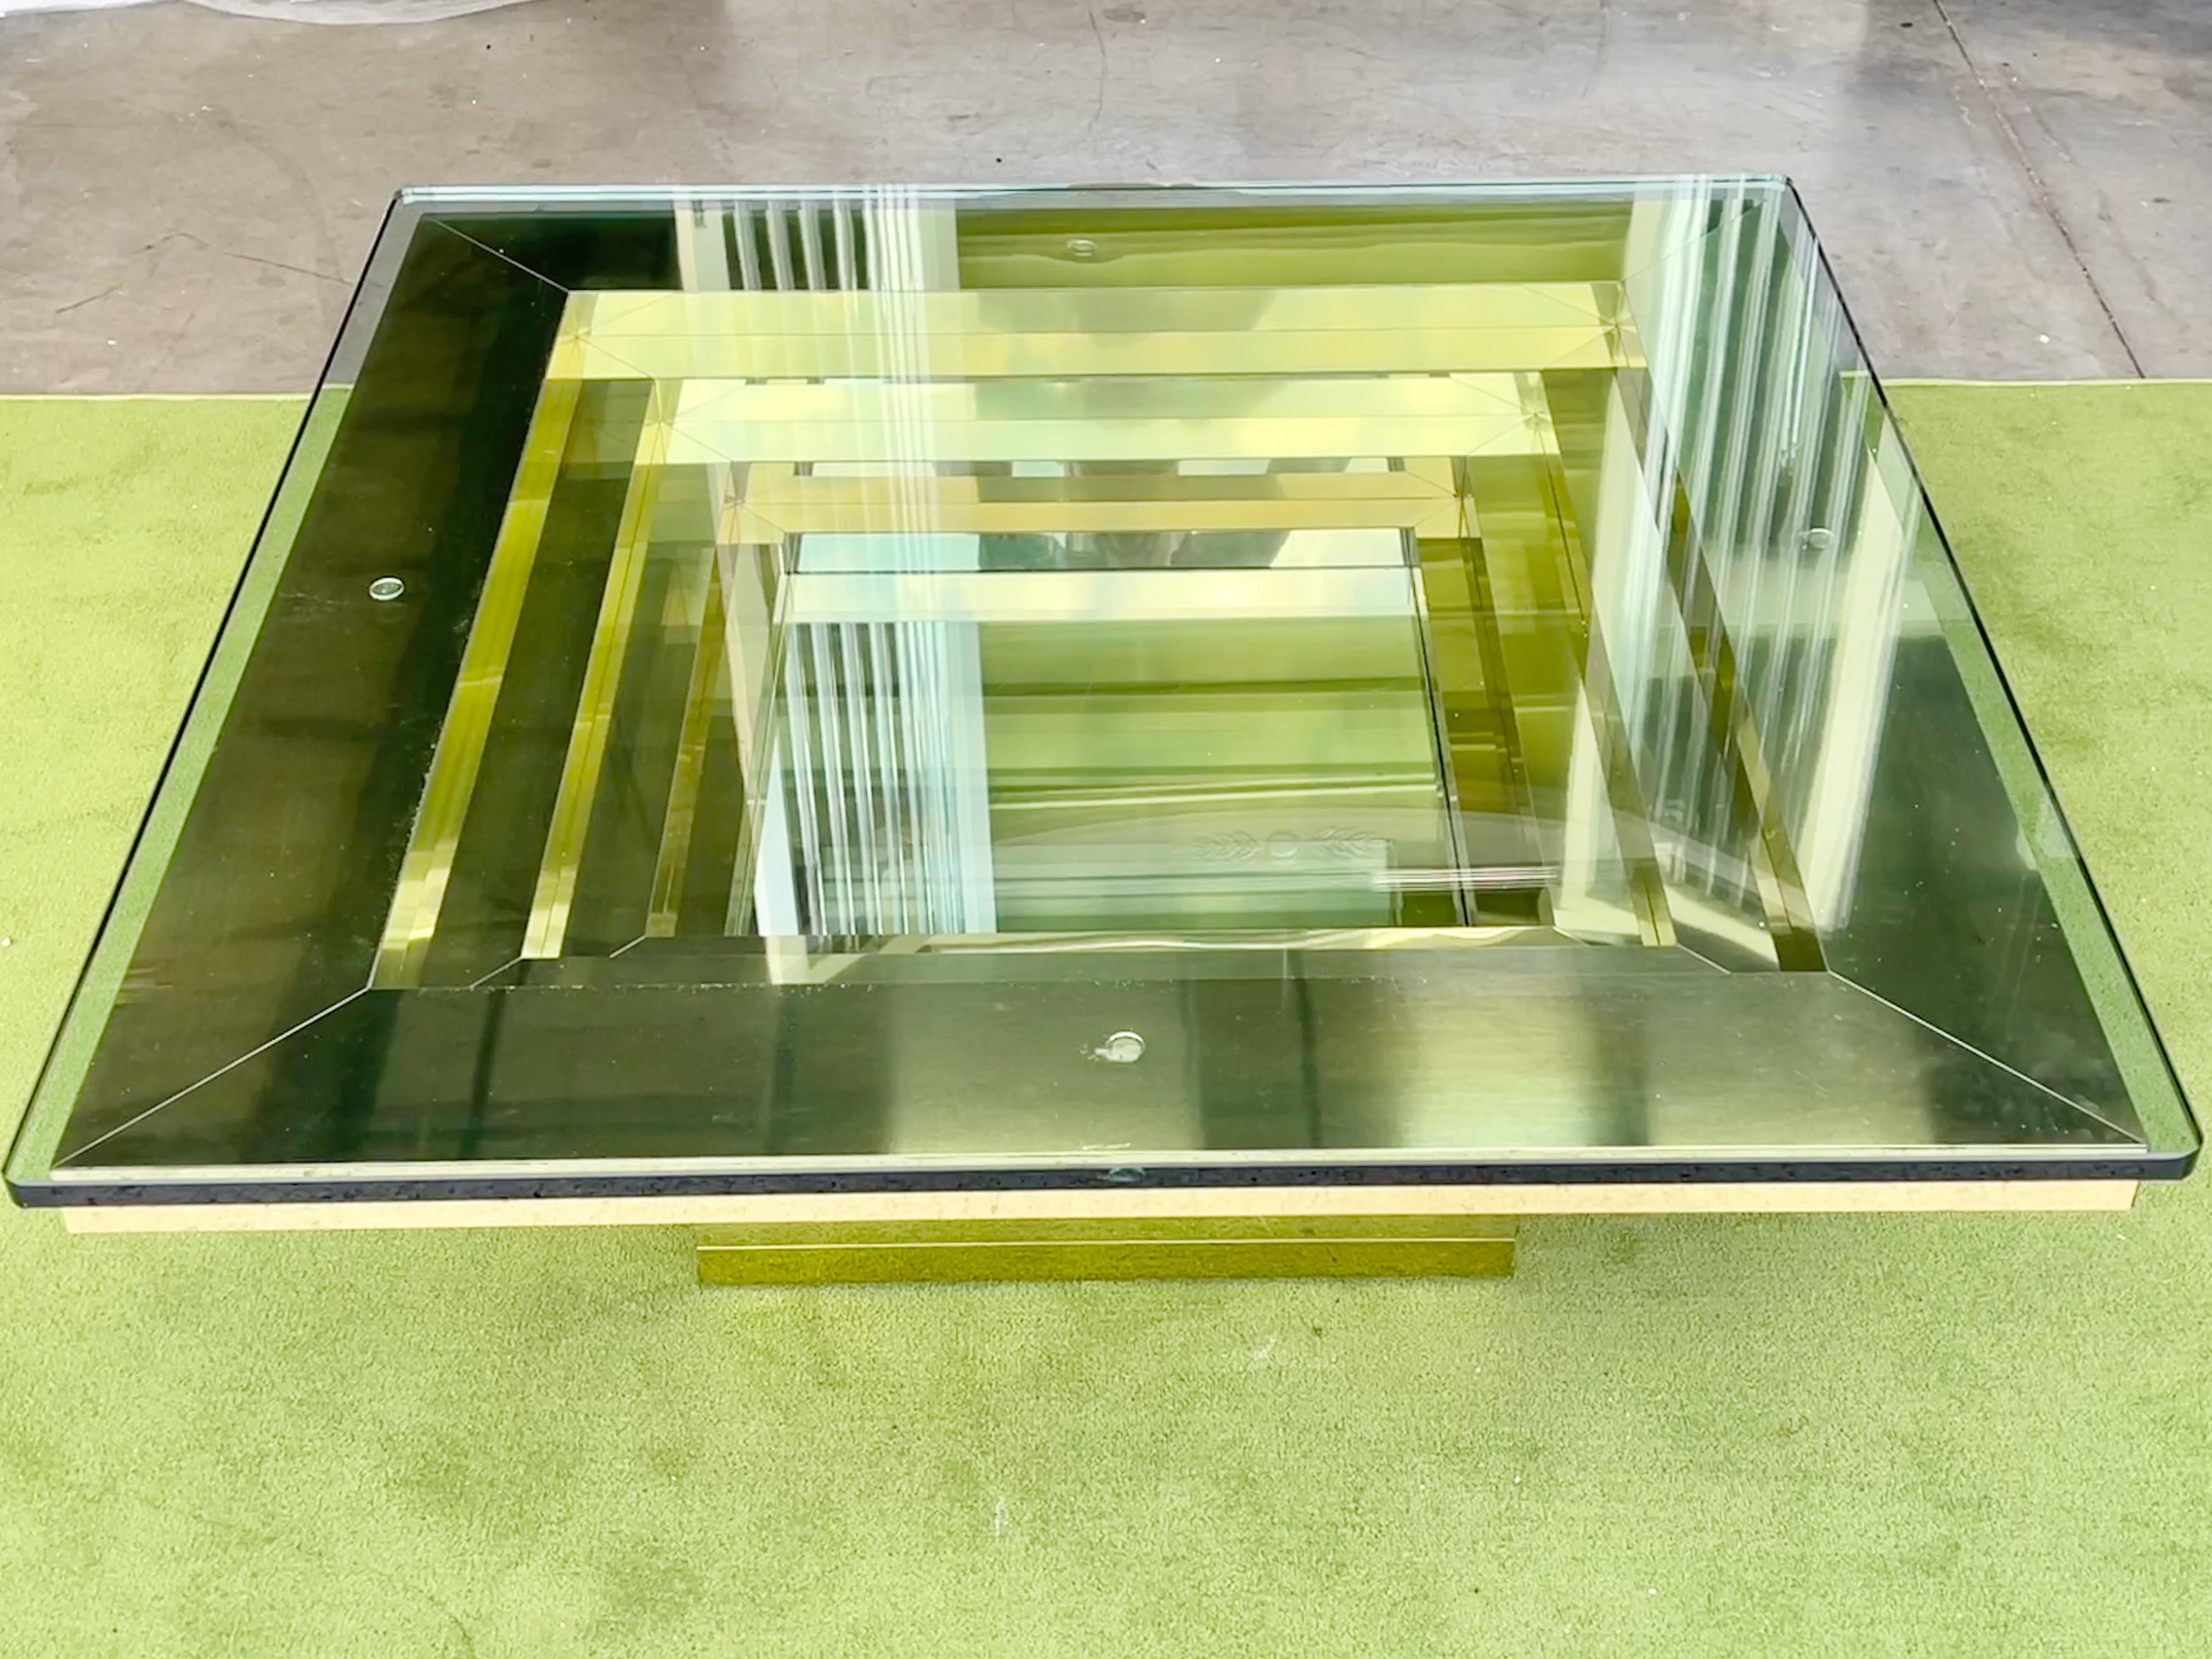 Ziggurat brass clad cocktail table in stepped inverted pyramid design with 0,75 inch thick glass top, USA circa 1983.
Interior well clad in mirror polished stainless steel.
Glamorous 80's 'cocaine decor'
Maker unknown.  Previously we had a larger